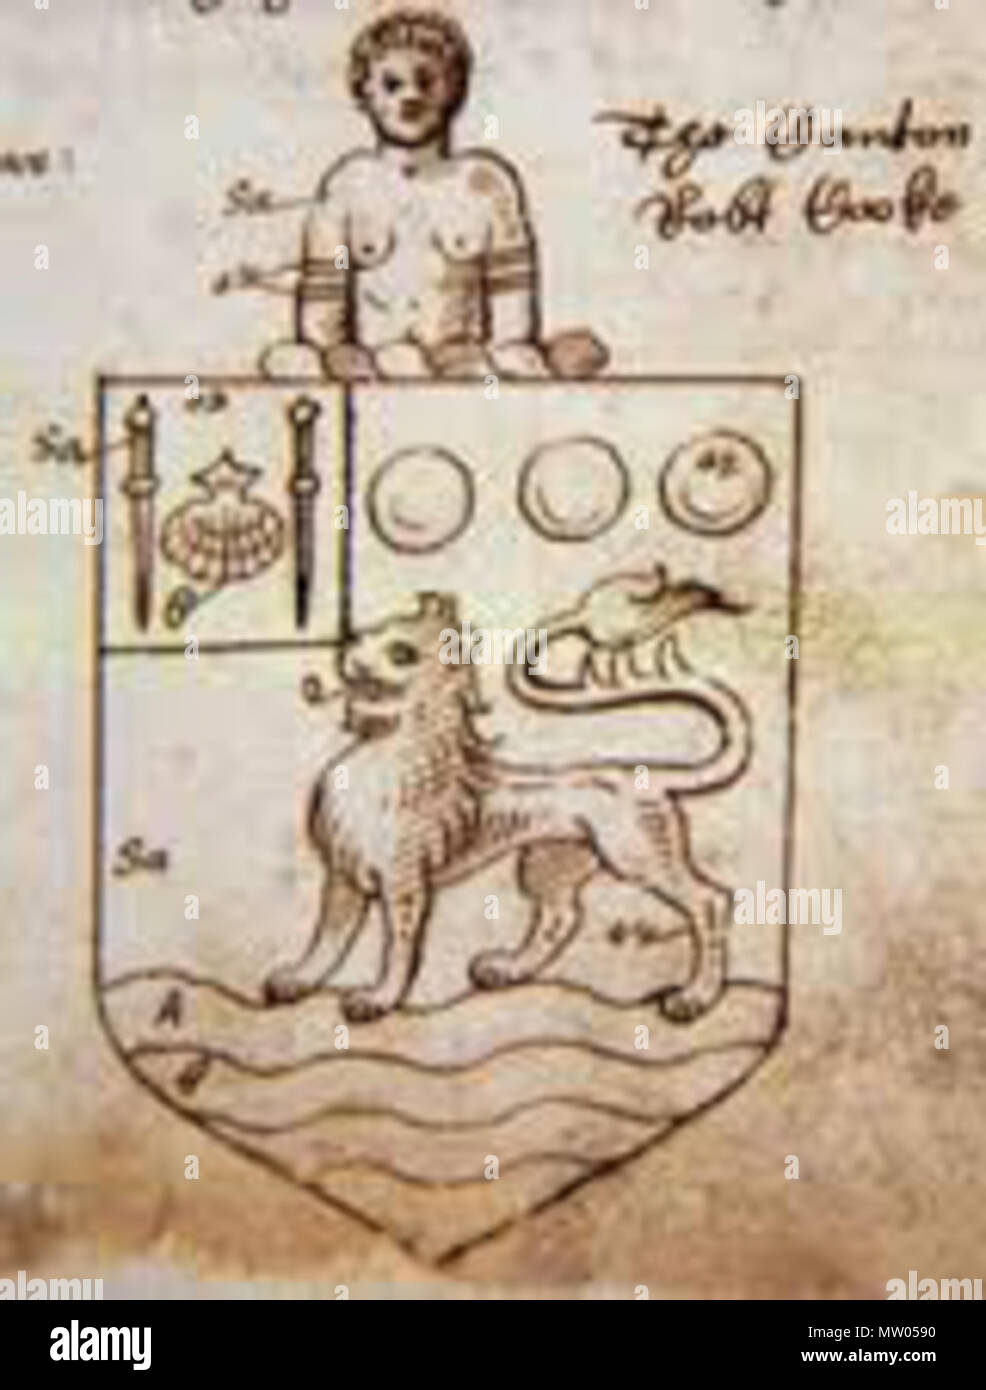 . English: The later grant of arms to John Hawkins in 1571, with the addition bearing heraldic symbols related to Riohacha, Colombia (then Rio de la Hacha), for his notable victory there, the addition being; on a canton or, an escallop between two palmers staves sable. Note the lion in the grant of arms is describes as passant, but in the accompanying illustration is statant. 4 January 1571. Robert Cook 560 Sir john hawkins later arms Stock Photo